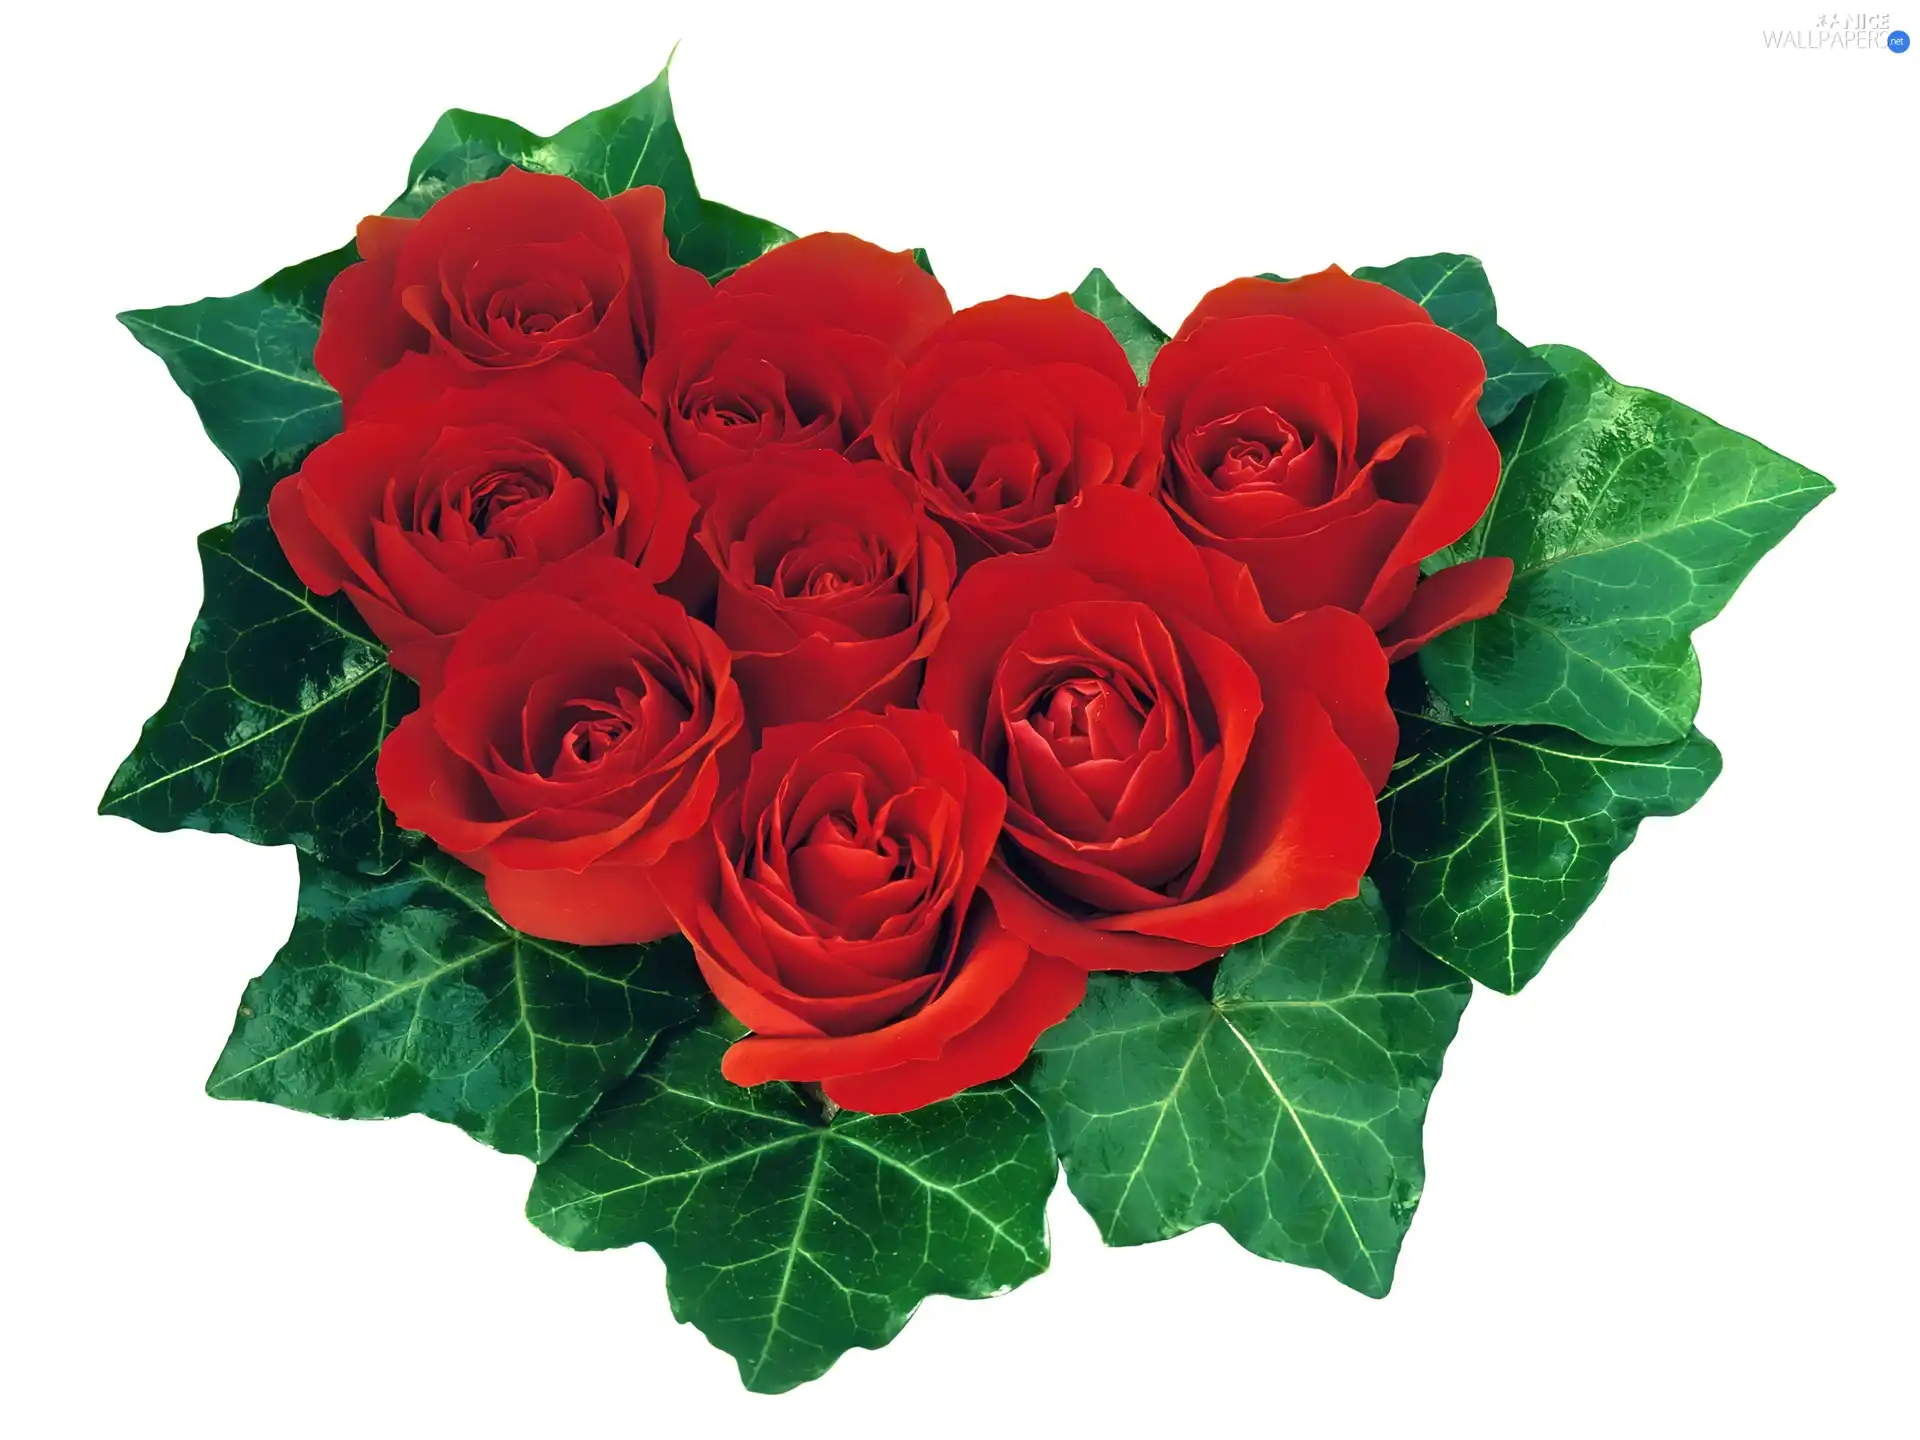 leaf, small bunch, roses, Green, Red